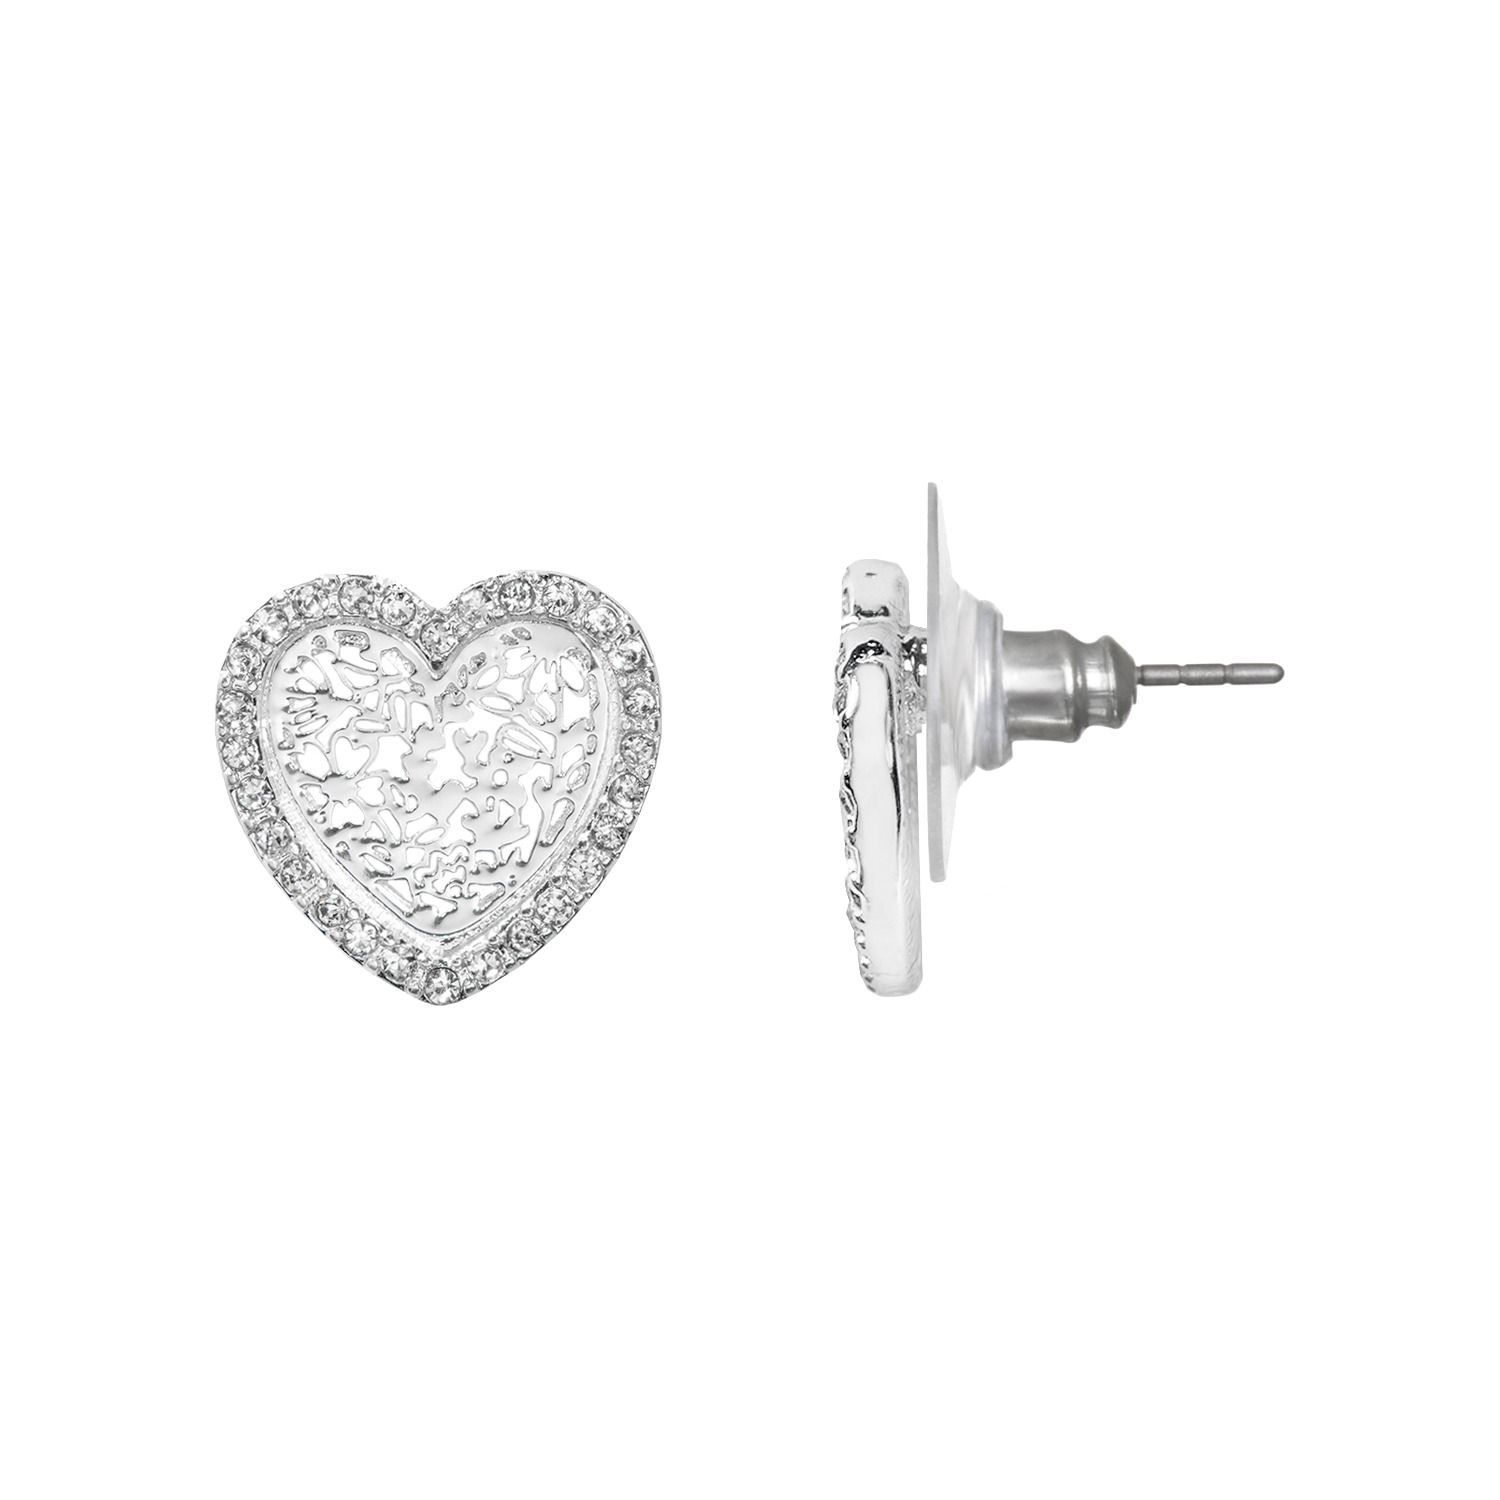 Image for LC Lauren Conrad Silver Tone Heart Filigree Nickel Free Button Earrings at Kohl's.